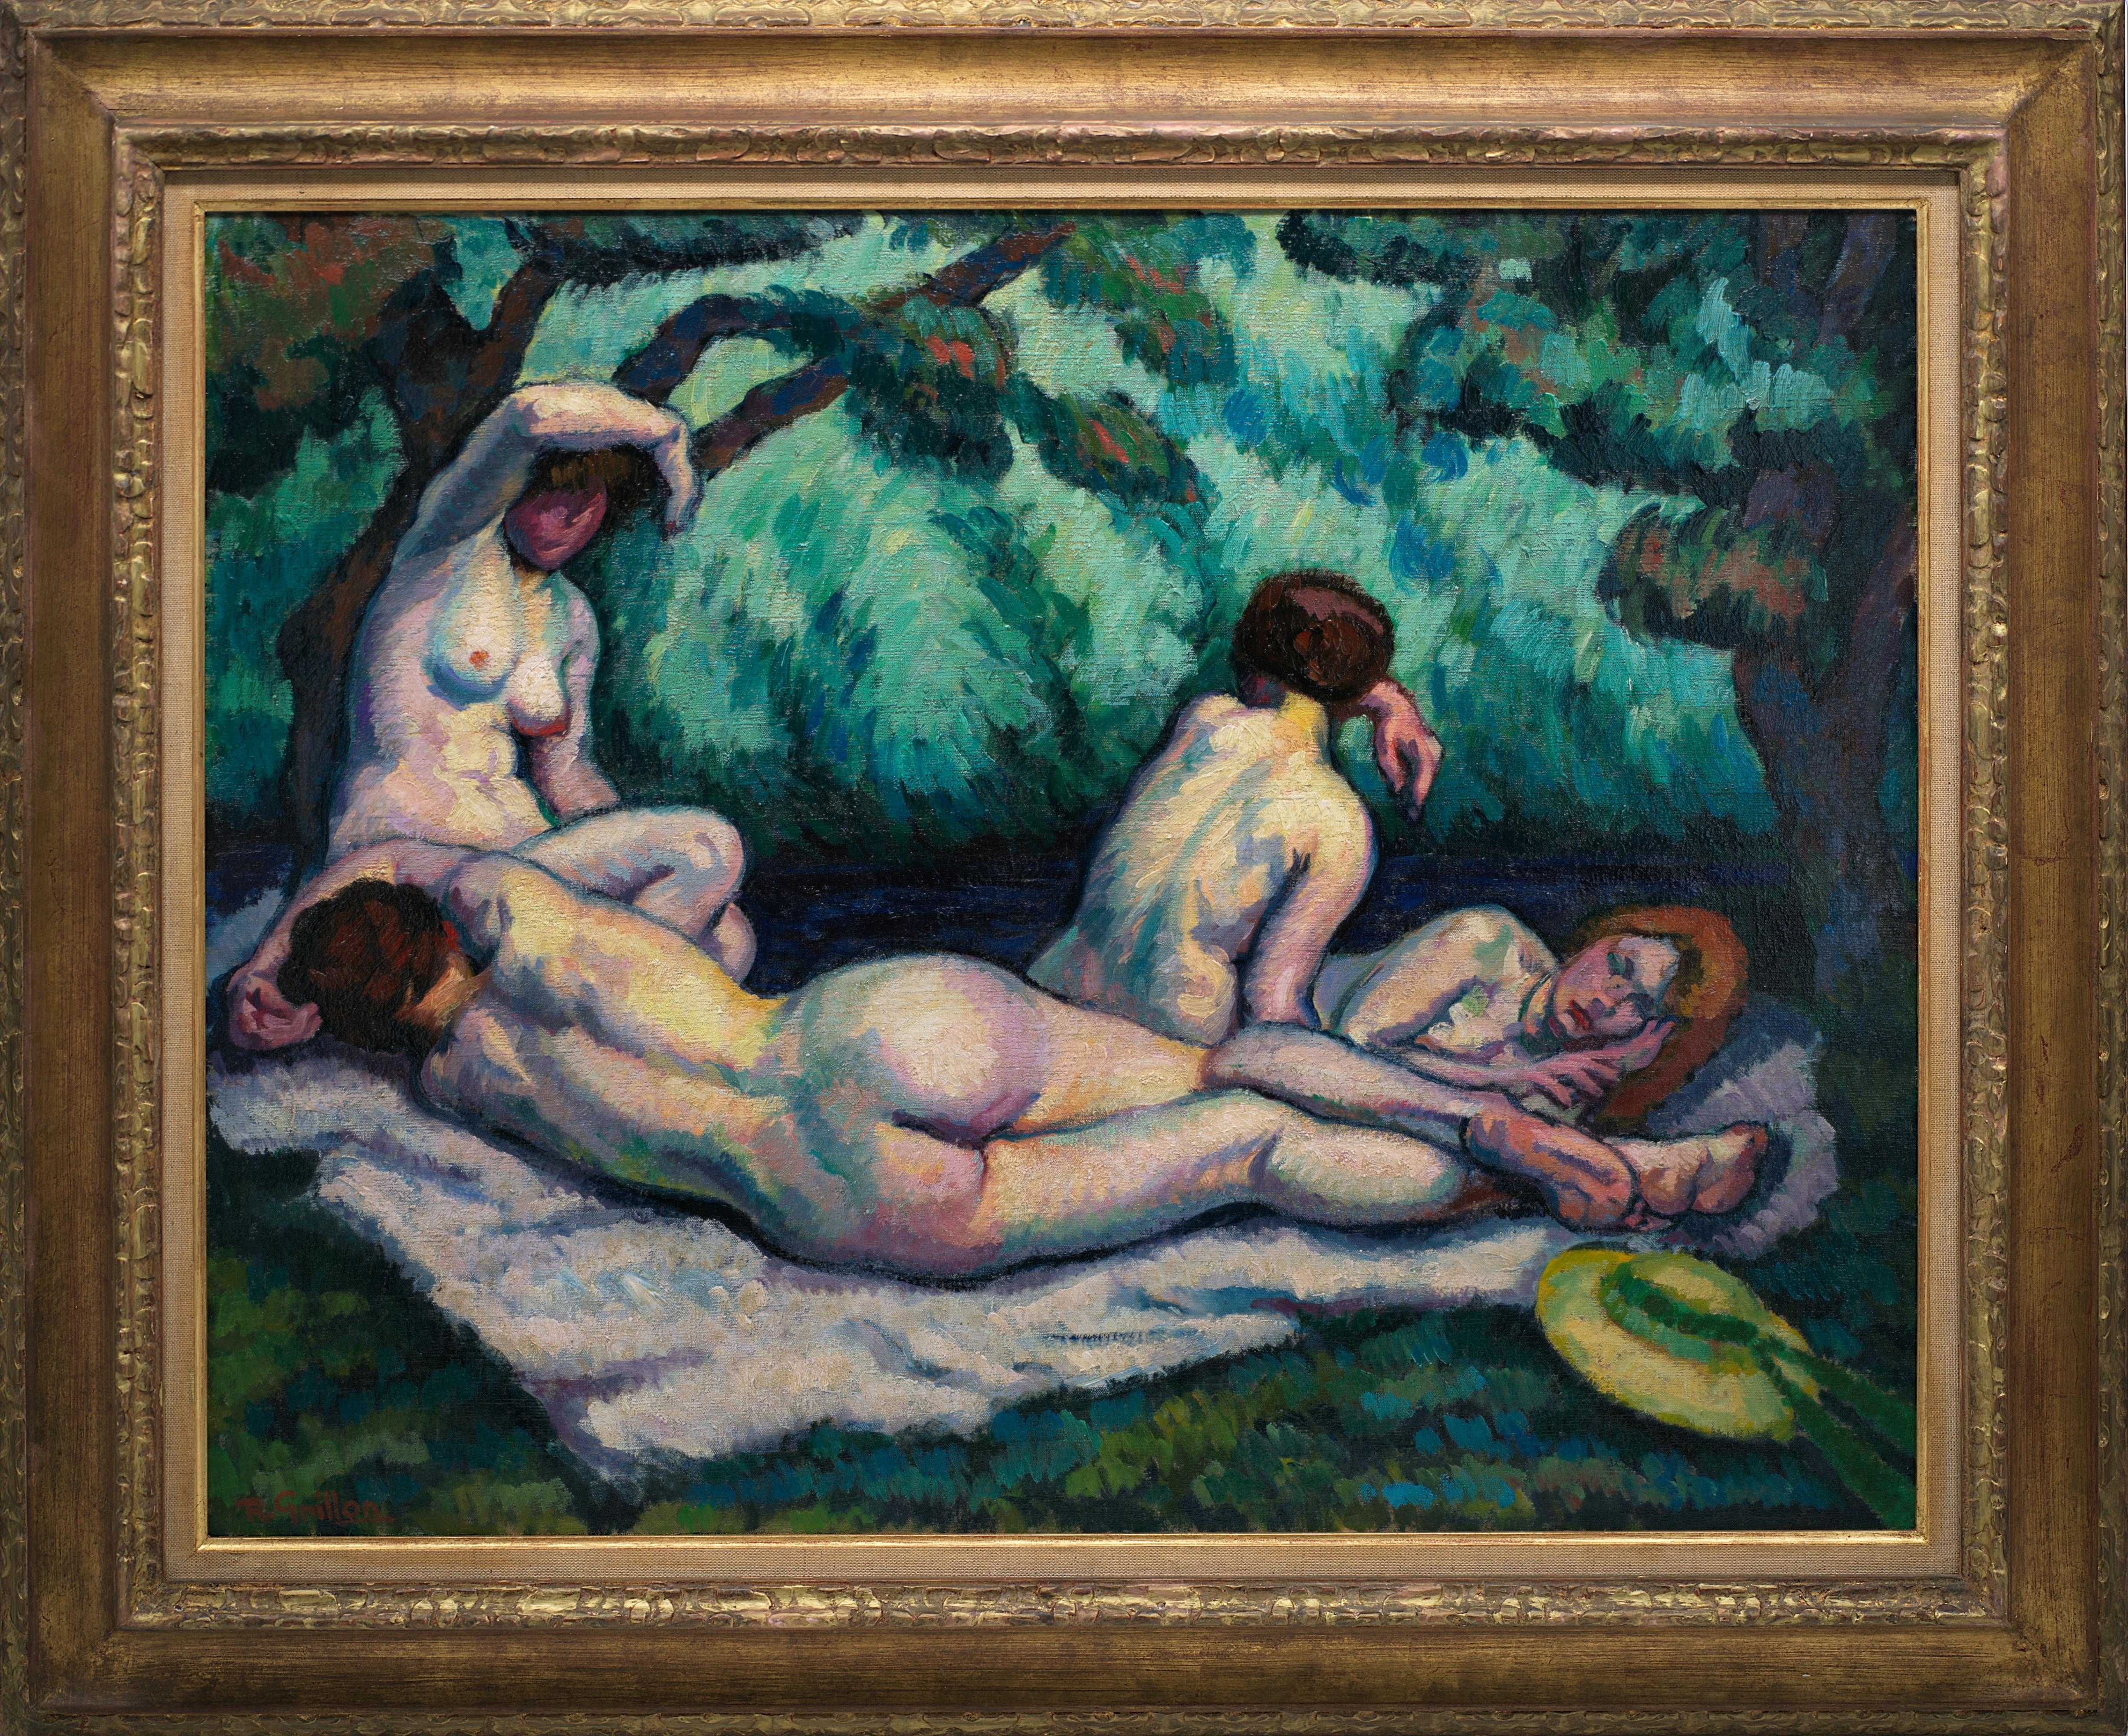 Roger Grillon Nude Painting - Bathers, Oil on Canvas, 1914